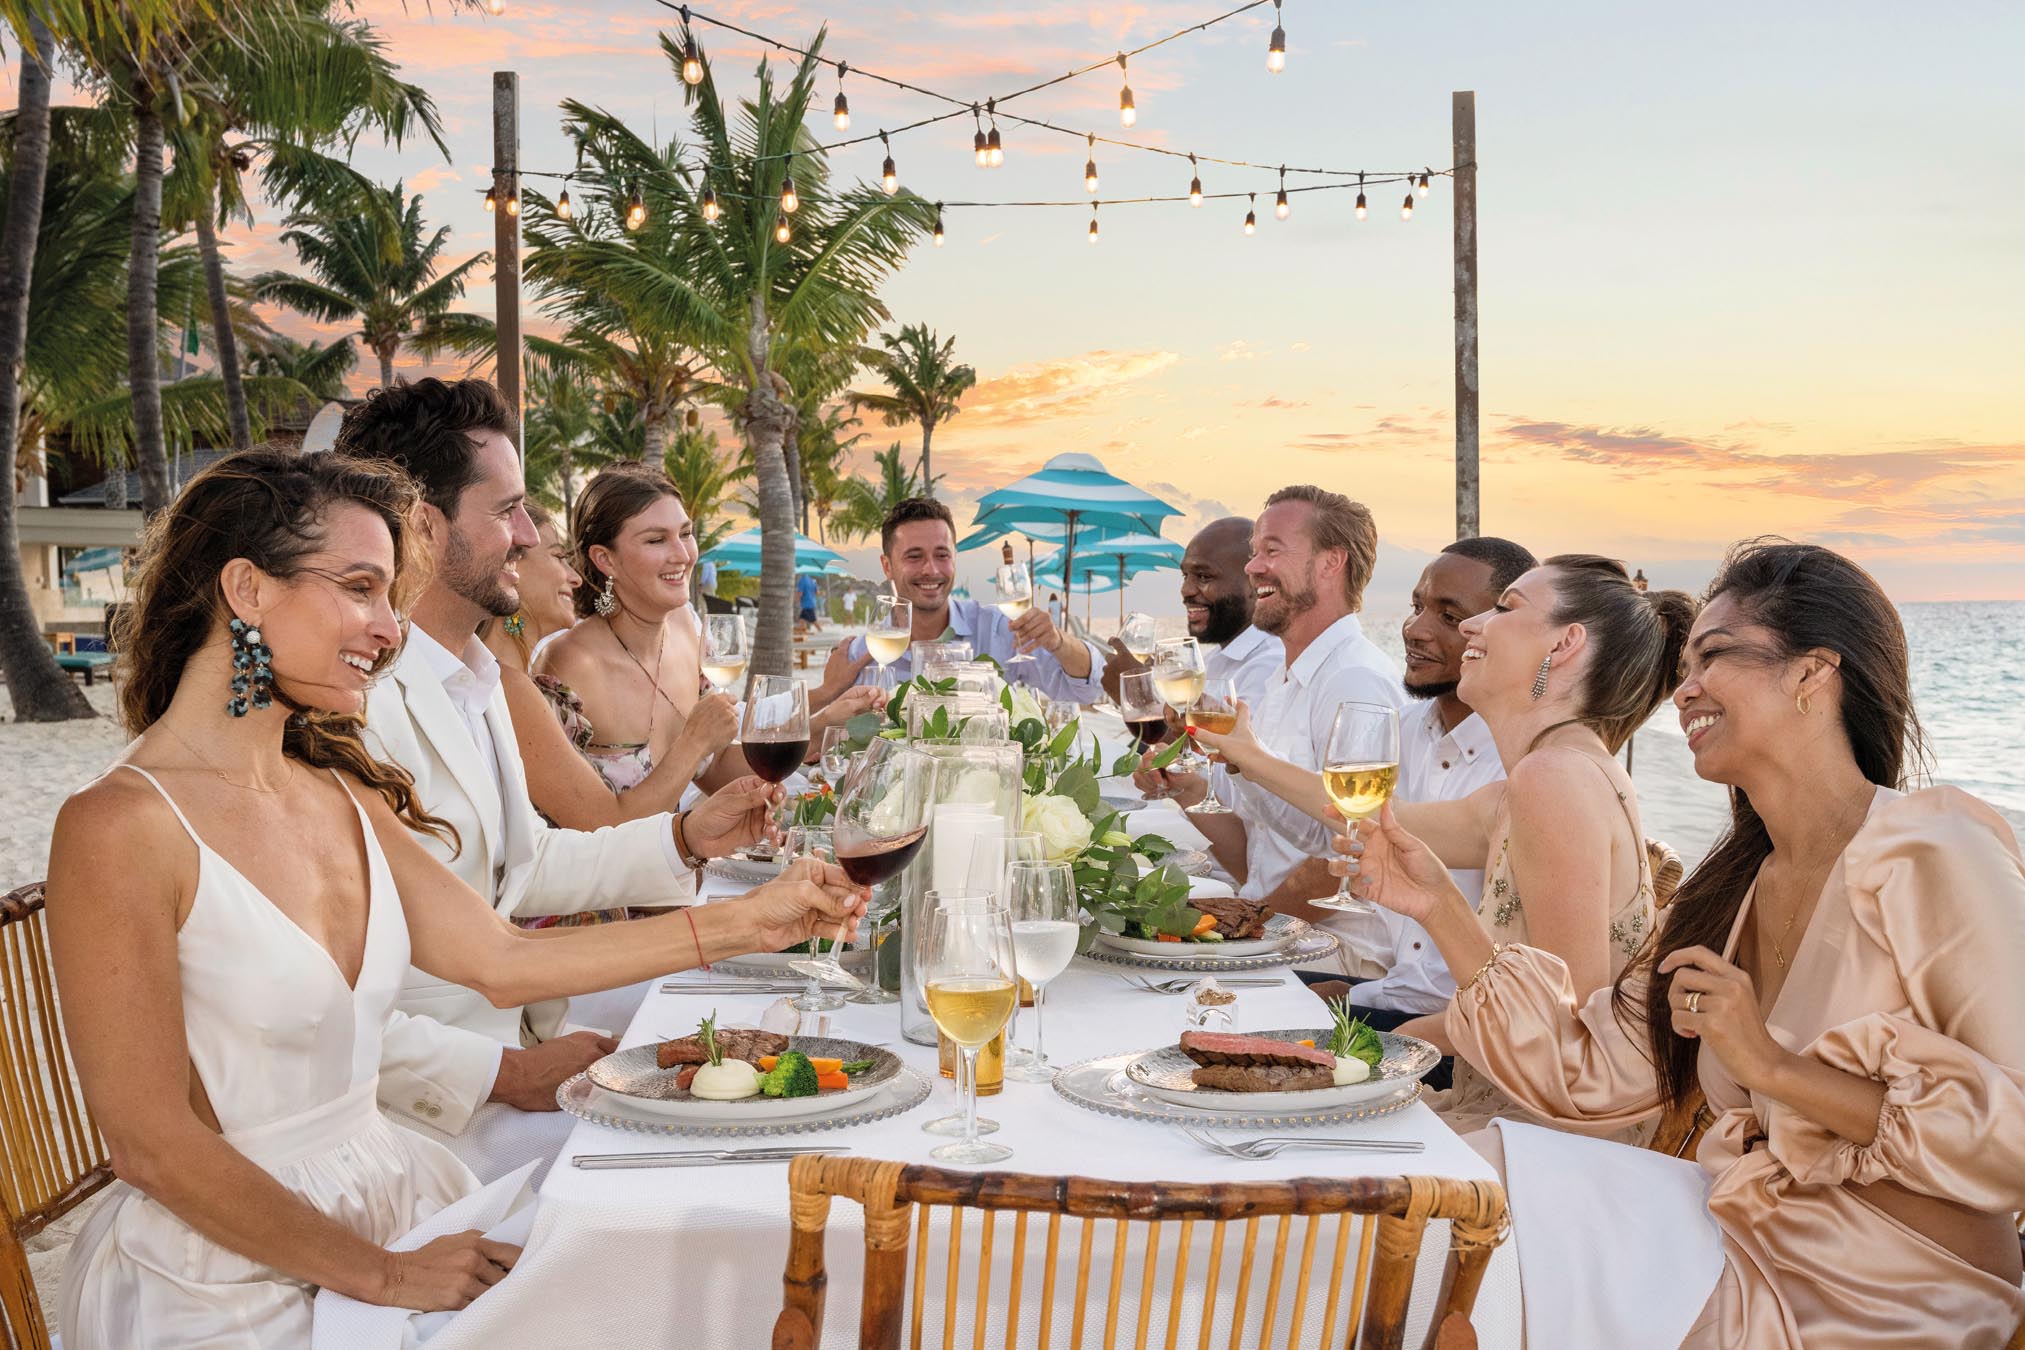 Group of people dining outside on beach